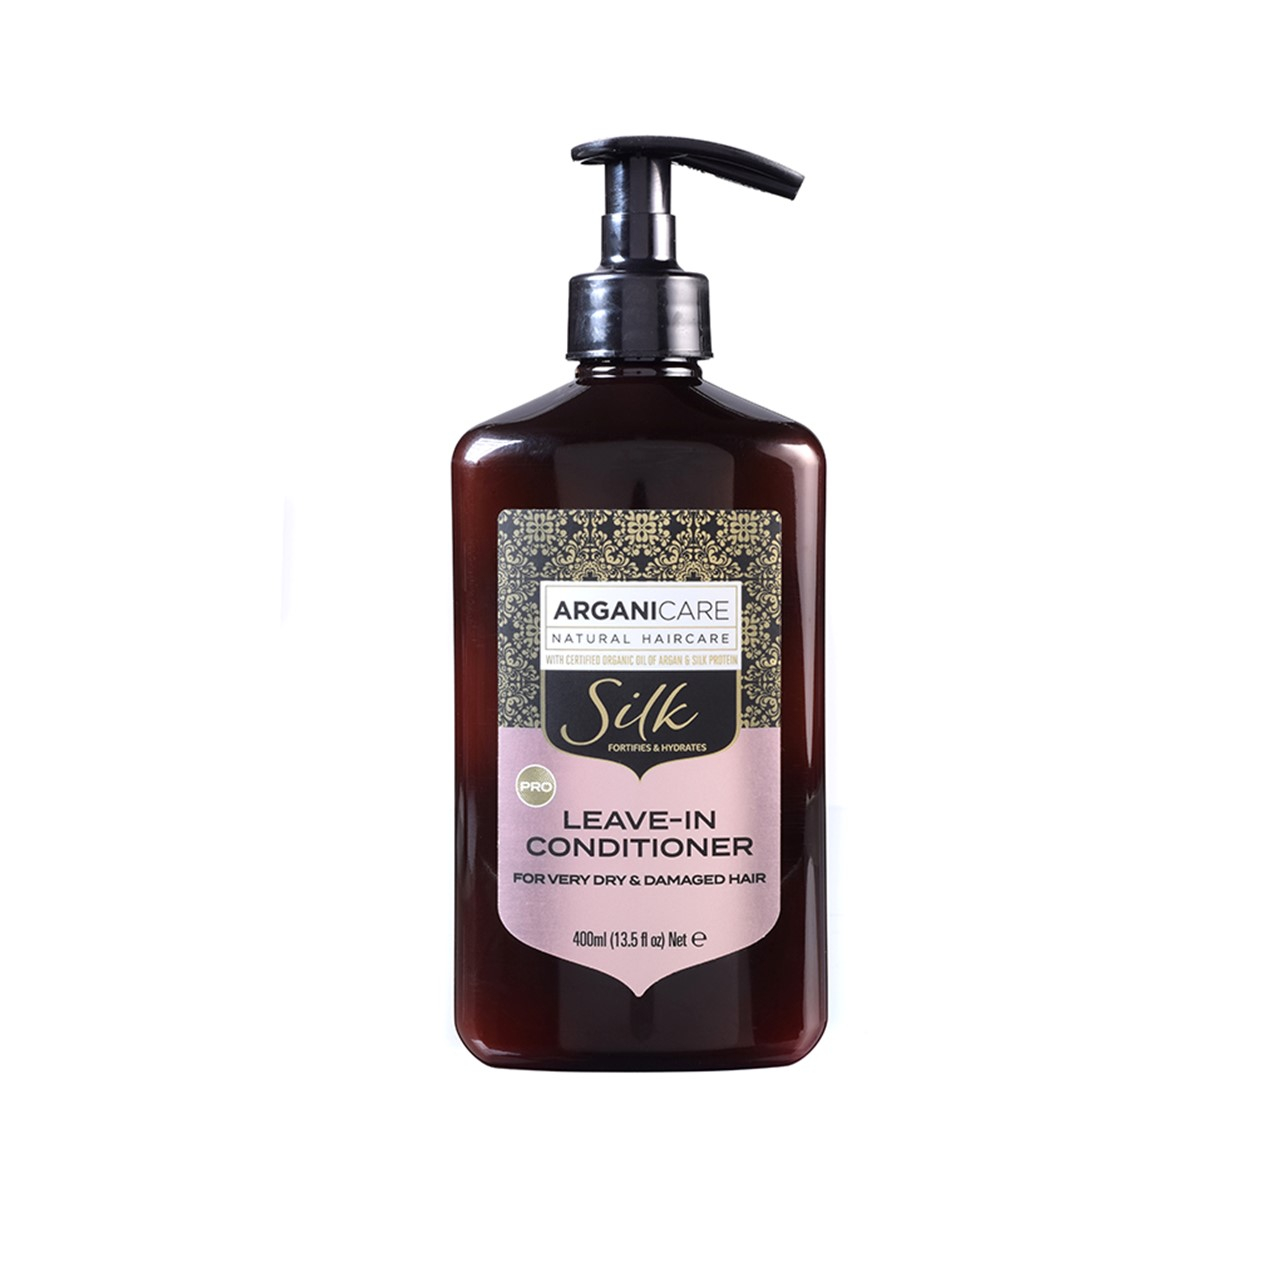 Arganicare Silk Leave-in Conditioner for Very Dry & Damaged Hair 400ml (13.5 fl oz)